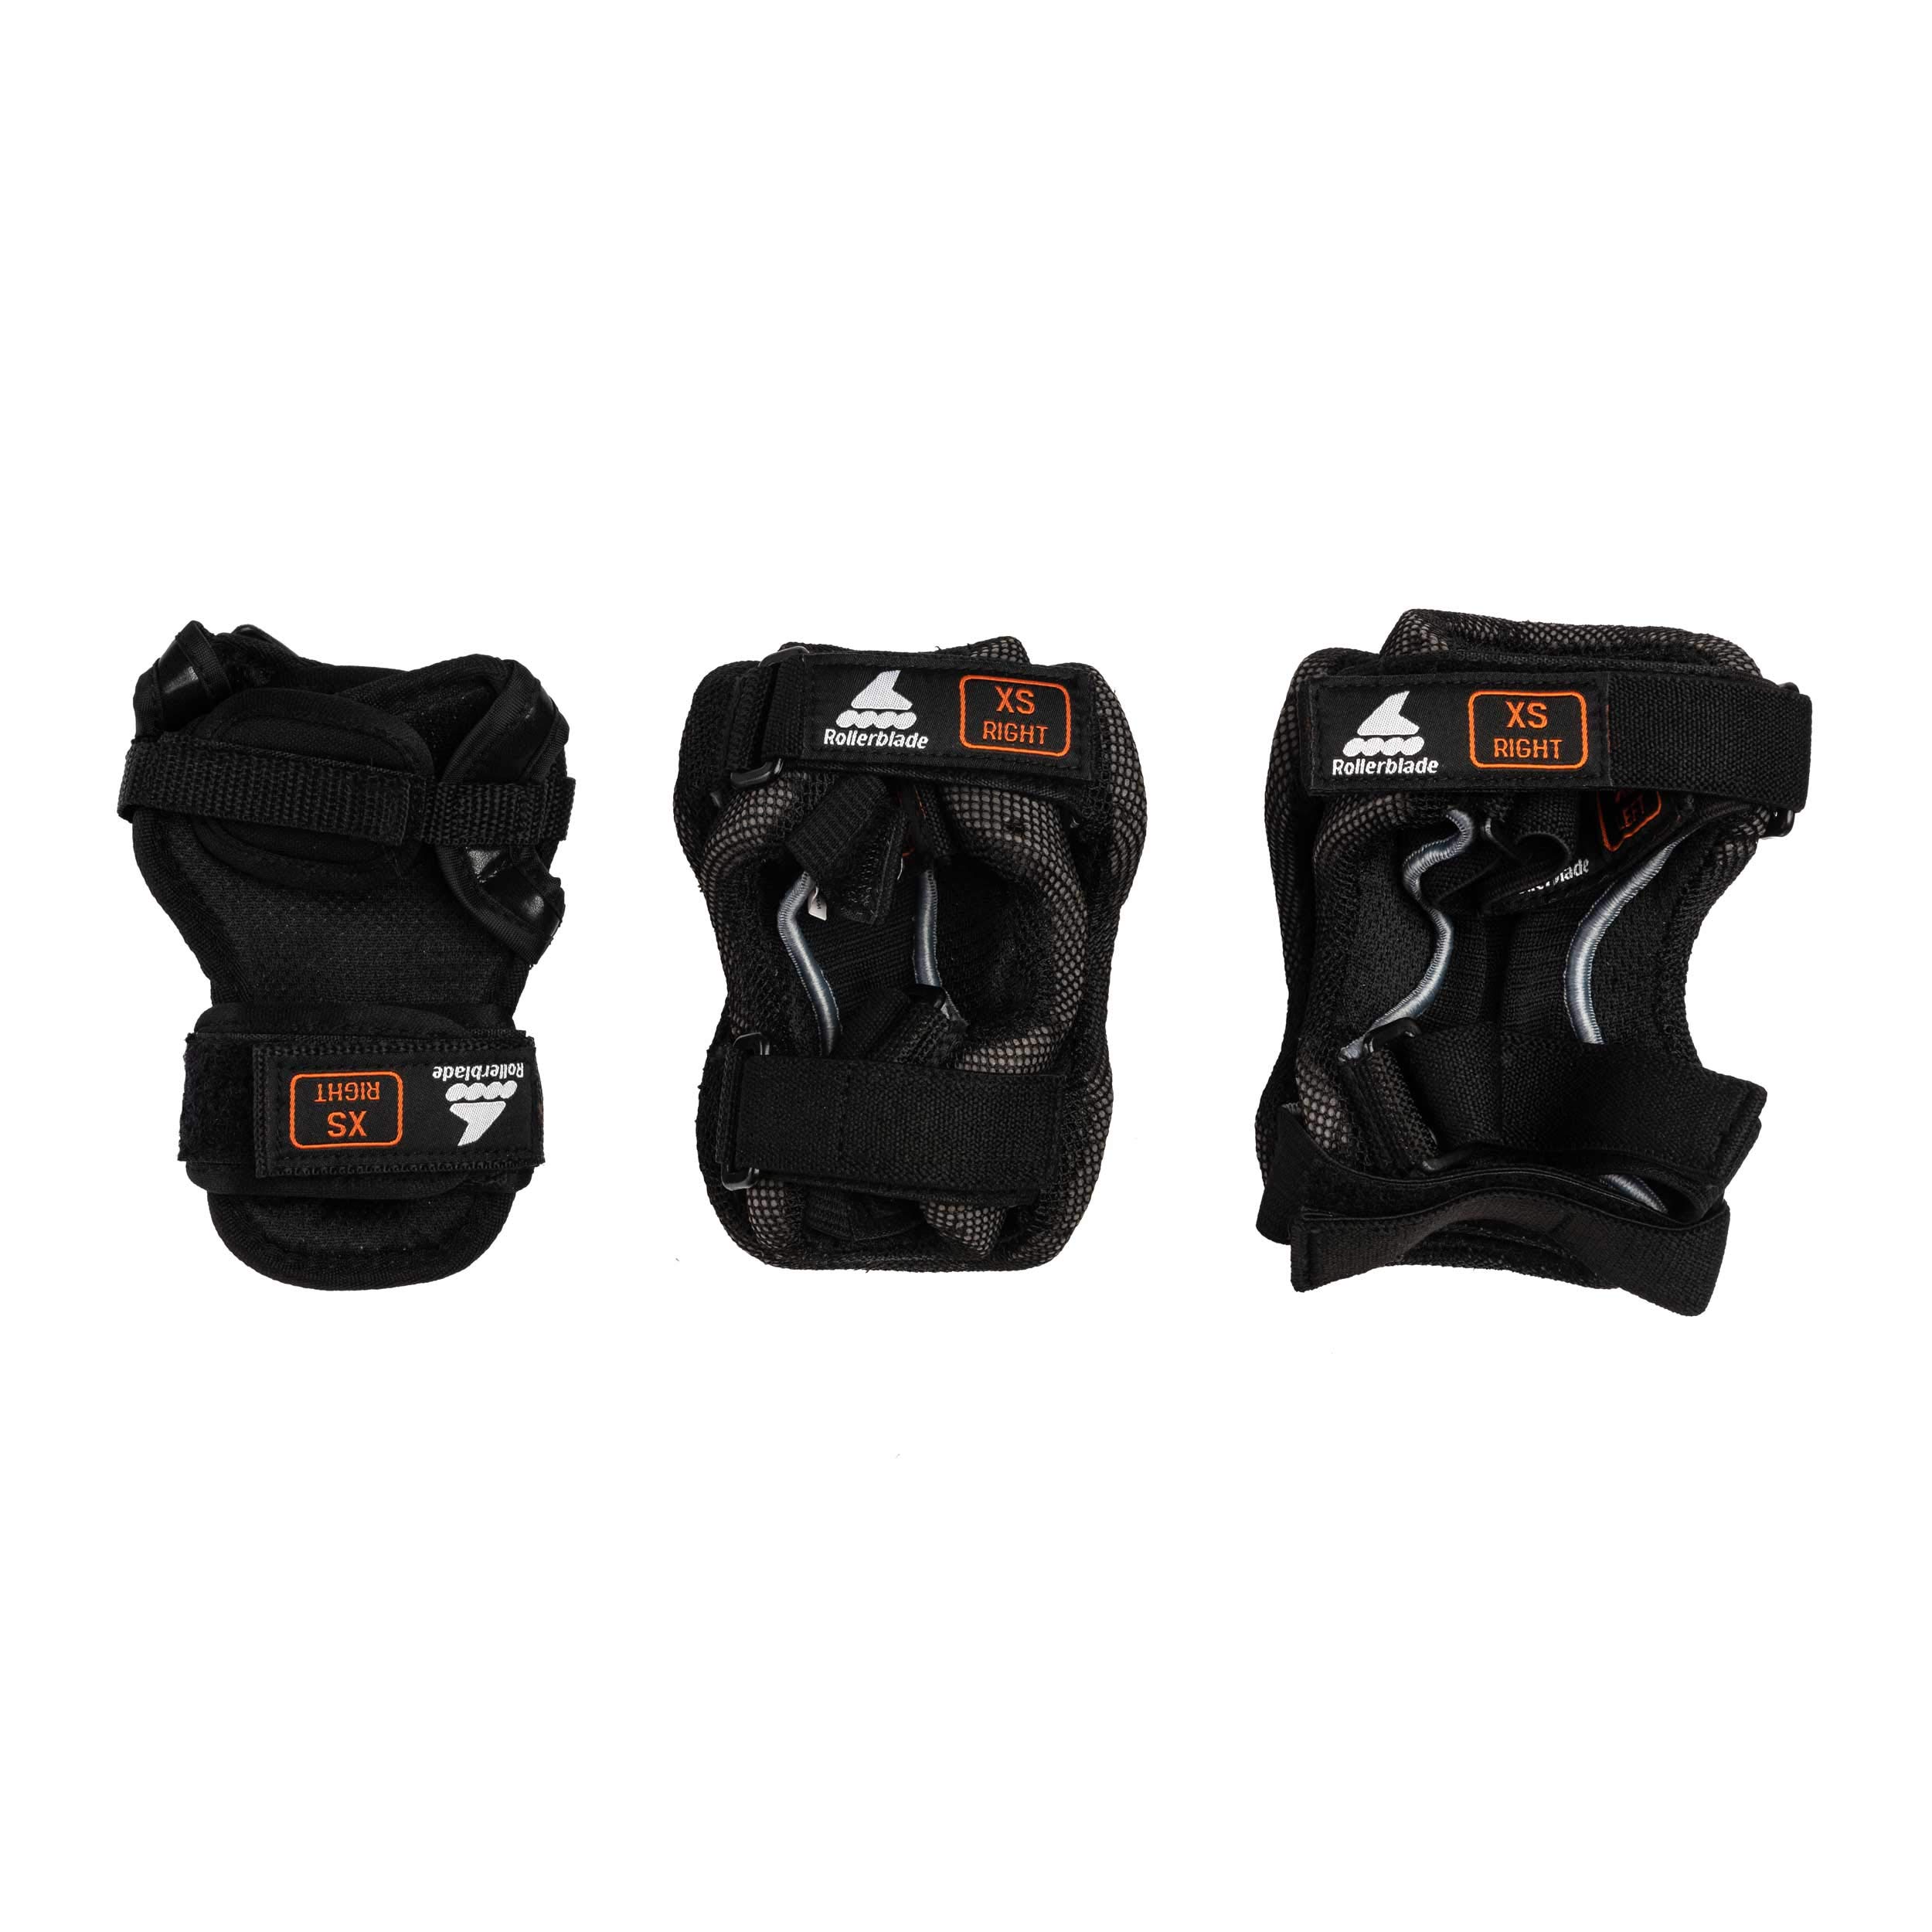 Rollerblade Skategear Junior 3 Pack Protective Gear, Knee Pads, Elbow Pads and Wrist Guards, Multi Sport Protection,Youth, Black